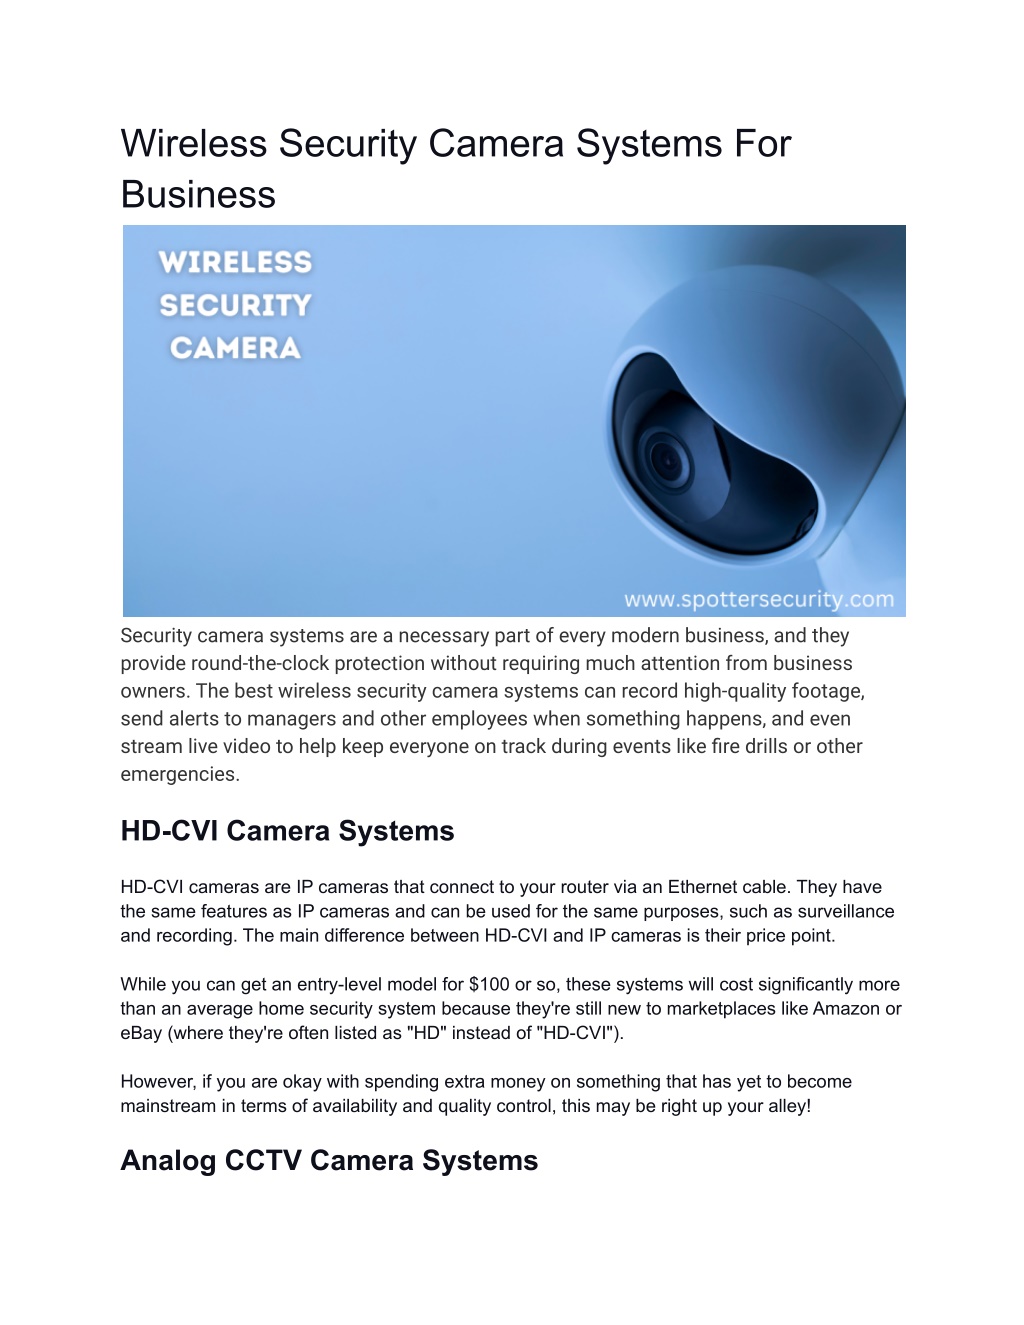 PPT - Wireless Security Camera Systems For Business PowerPoint